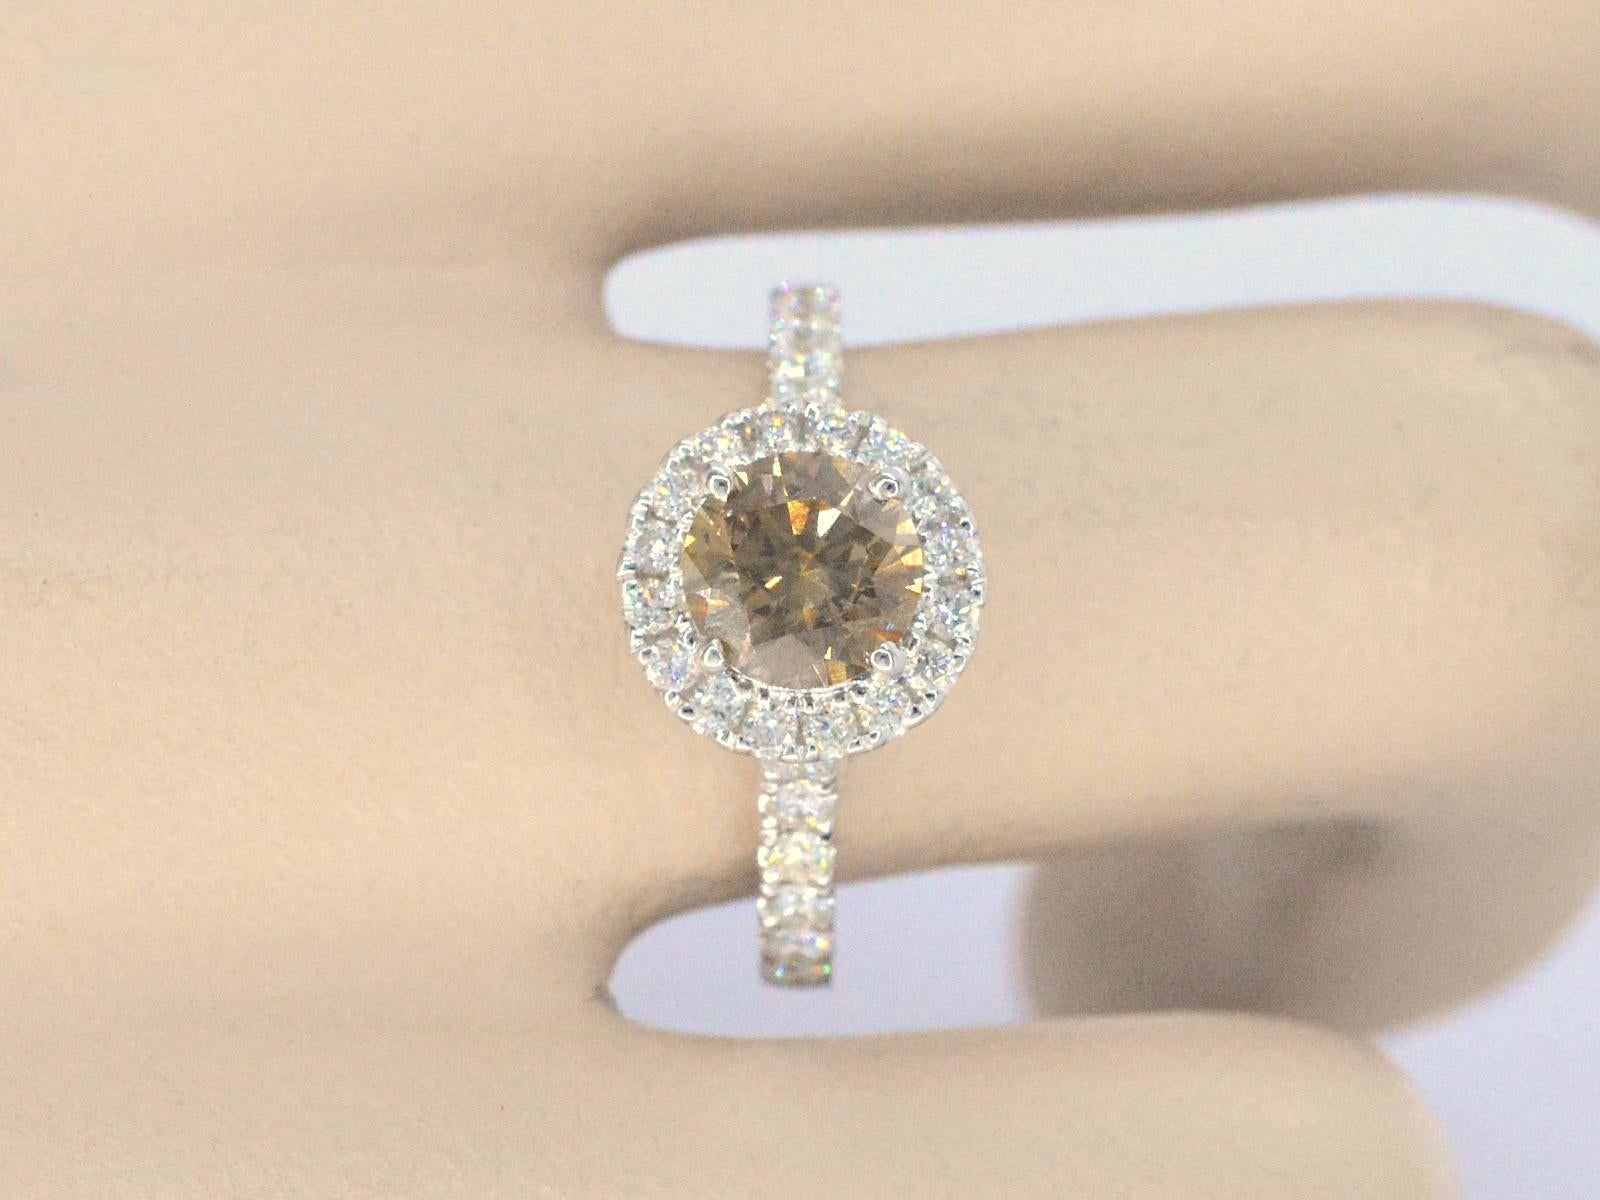 This ring features an elegant blend of diamonds and precious metals. It has one central diamond with a weight of 1.01 carats, cut in a brilliant shape, boasting a fancy cognac color and SI2 purity, with a grinding quality rated as very